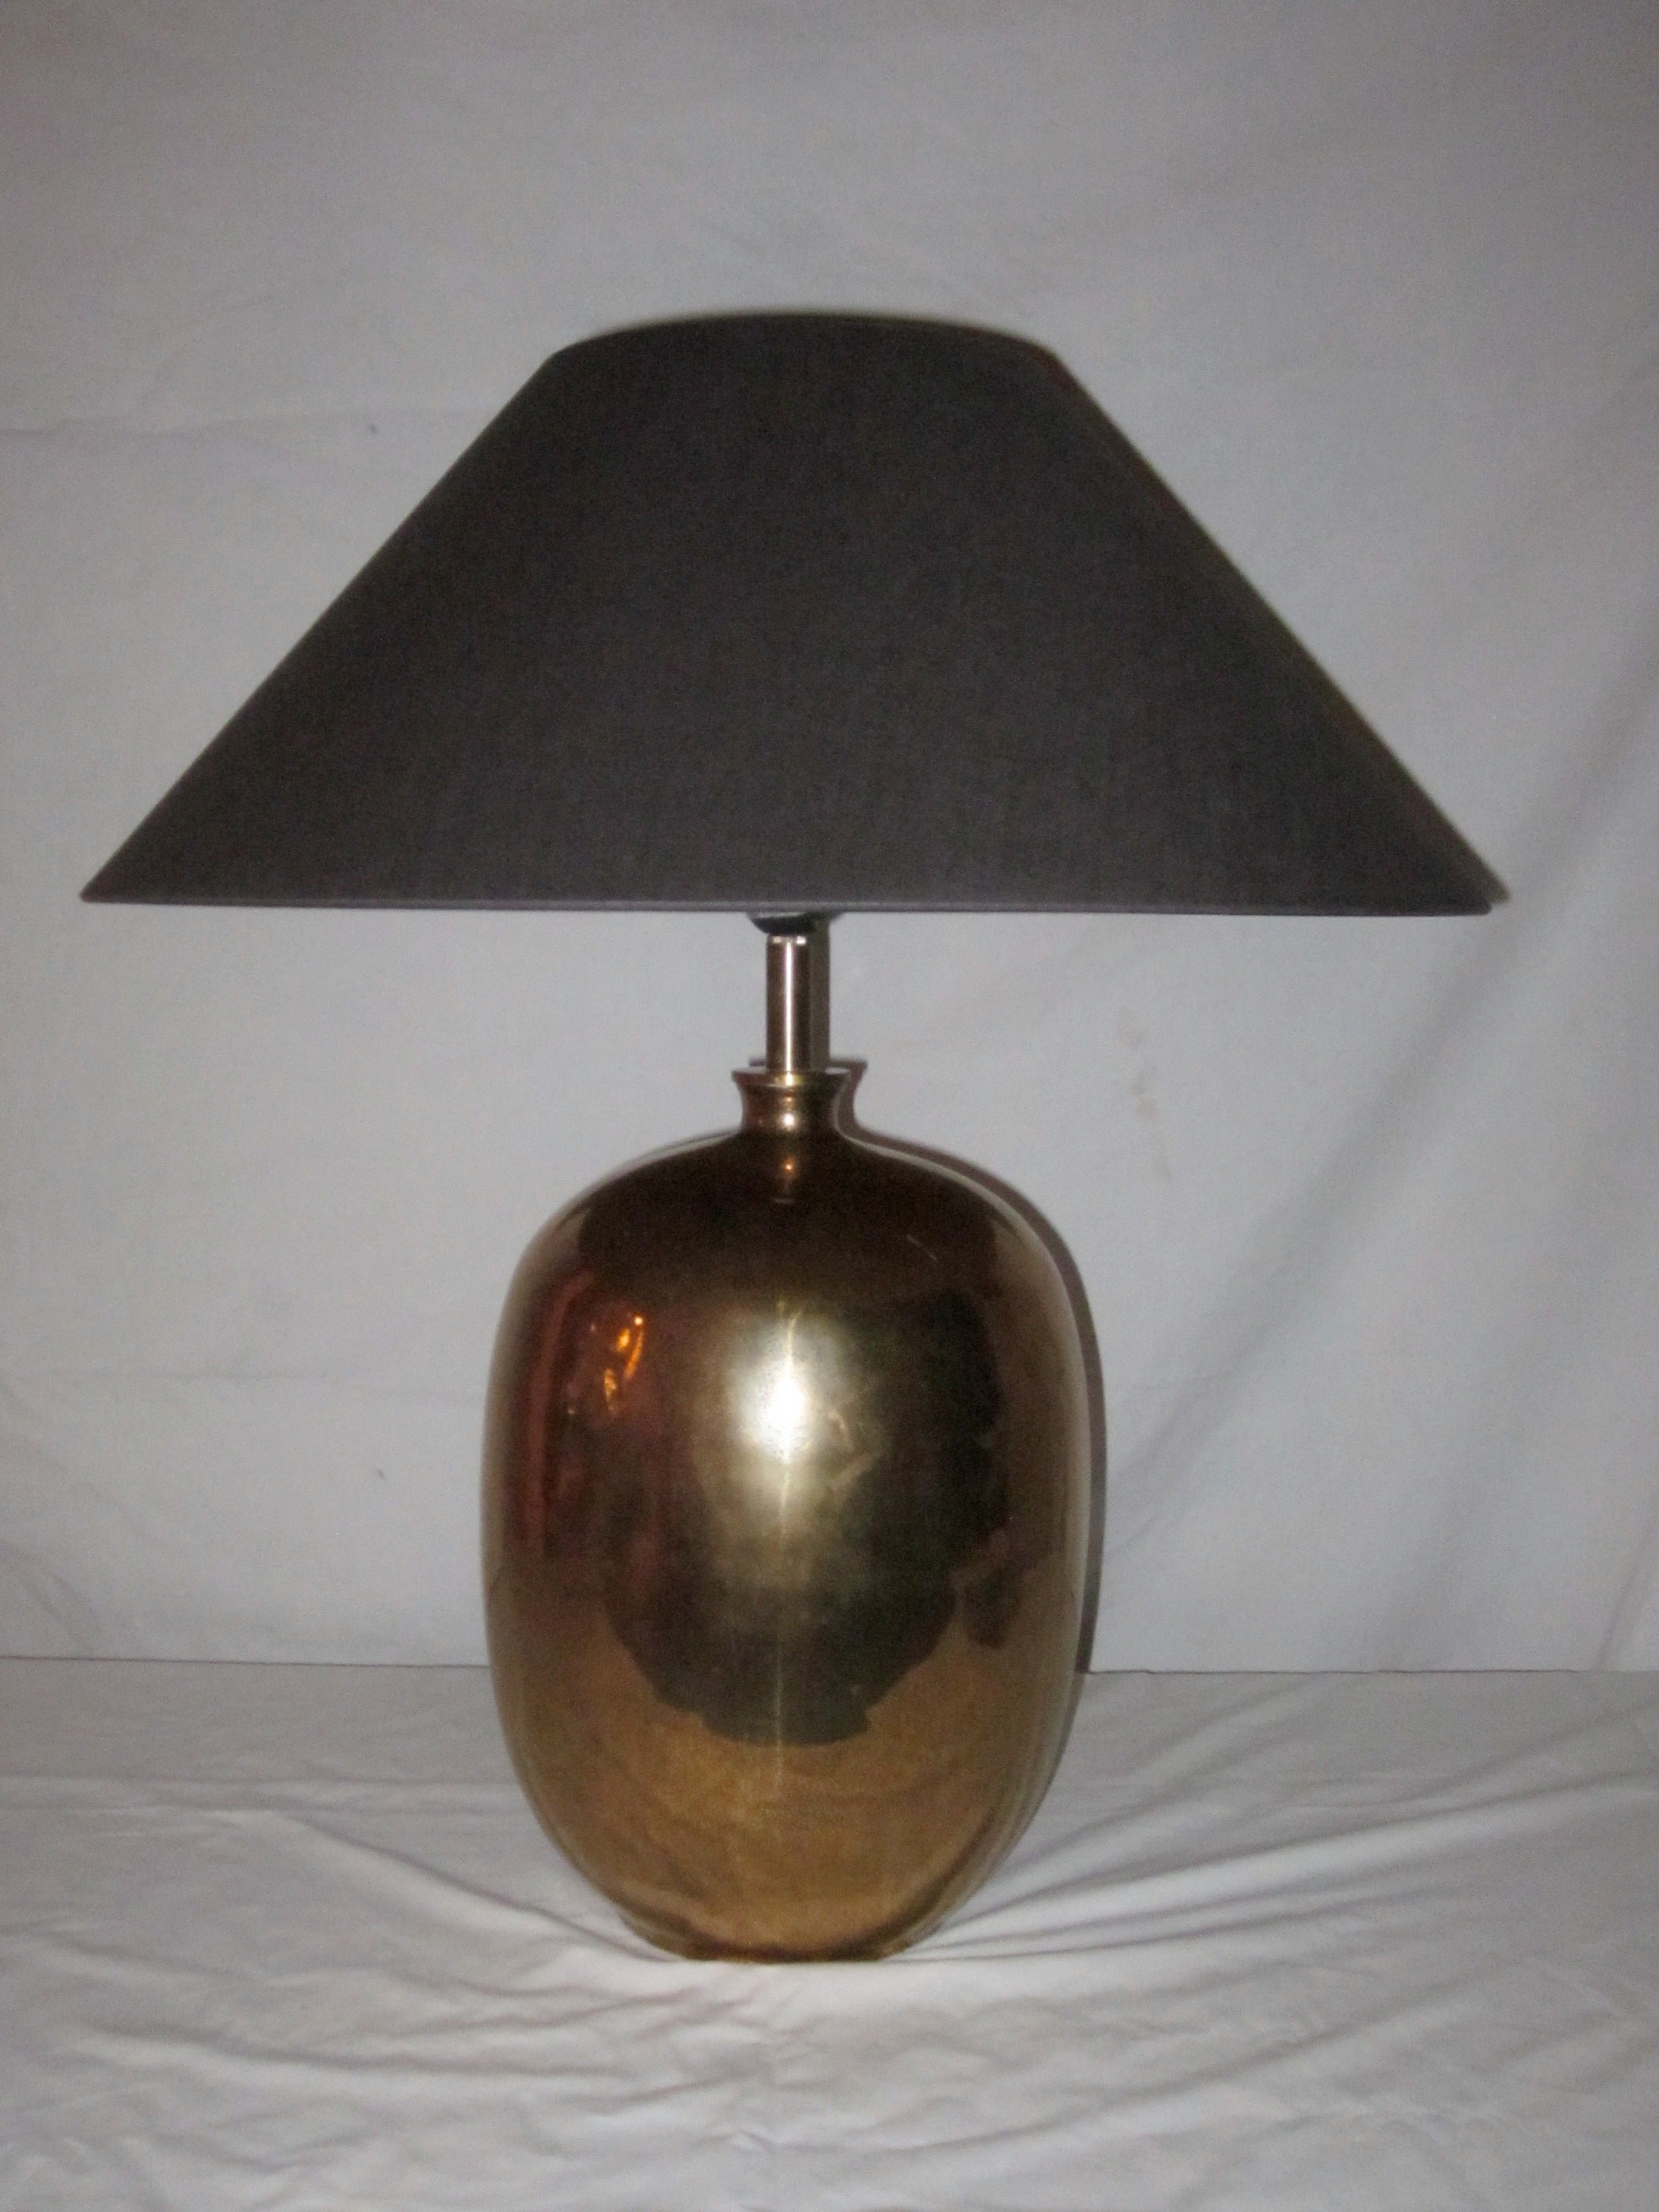 Pair of Gold Faux Shagreen Porcelain Egg-Shaped Lamps, Contemporary